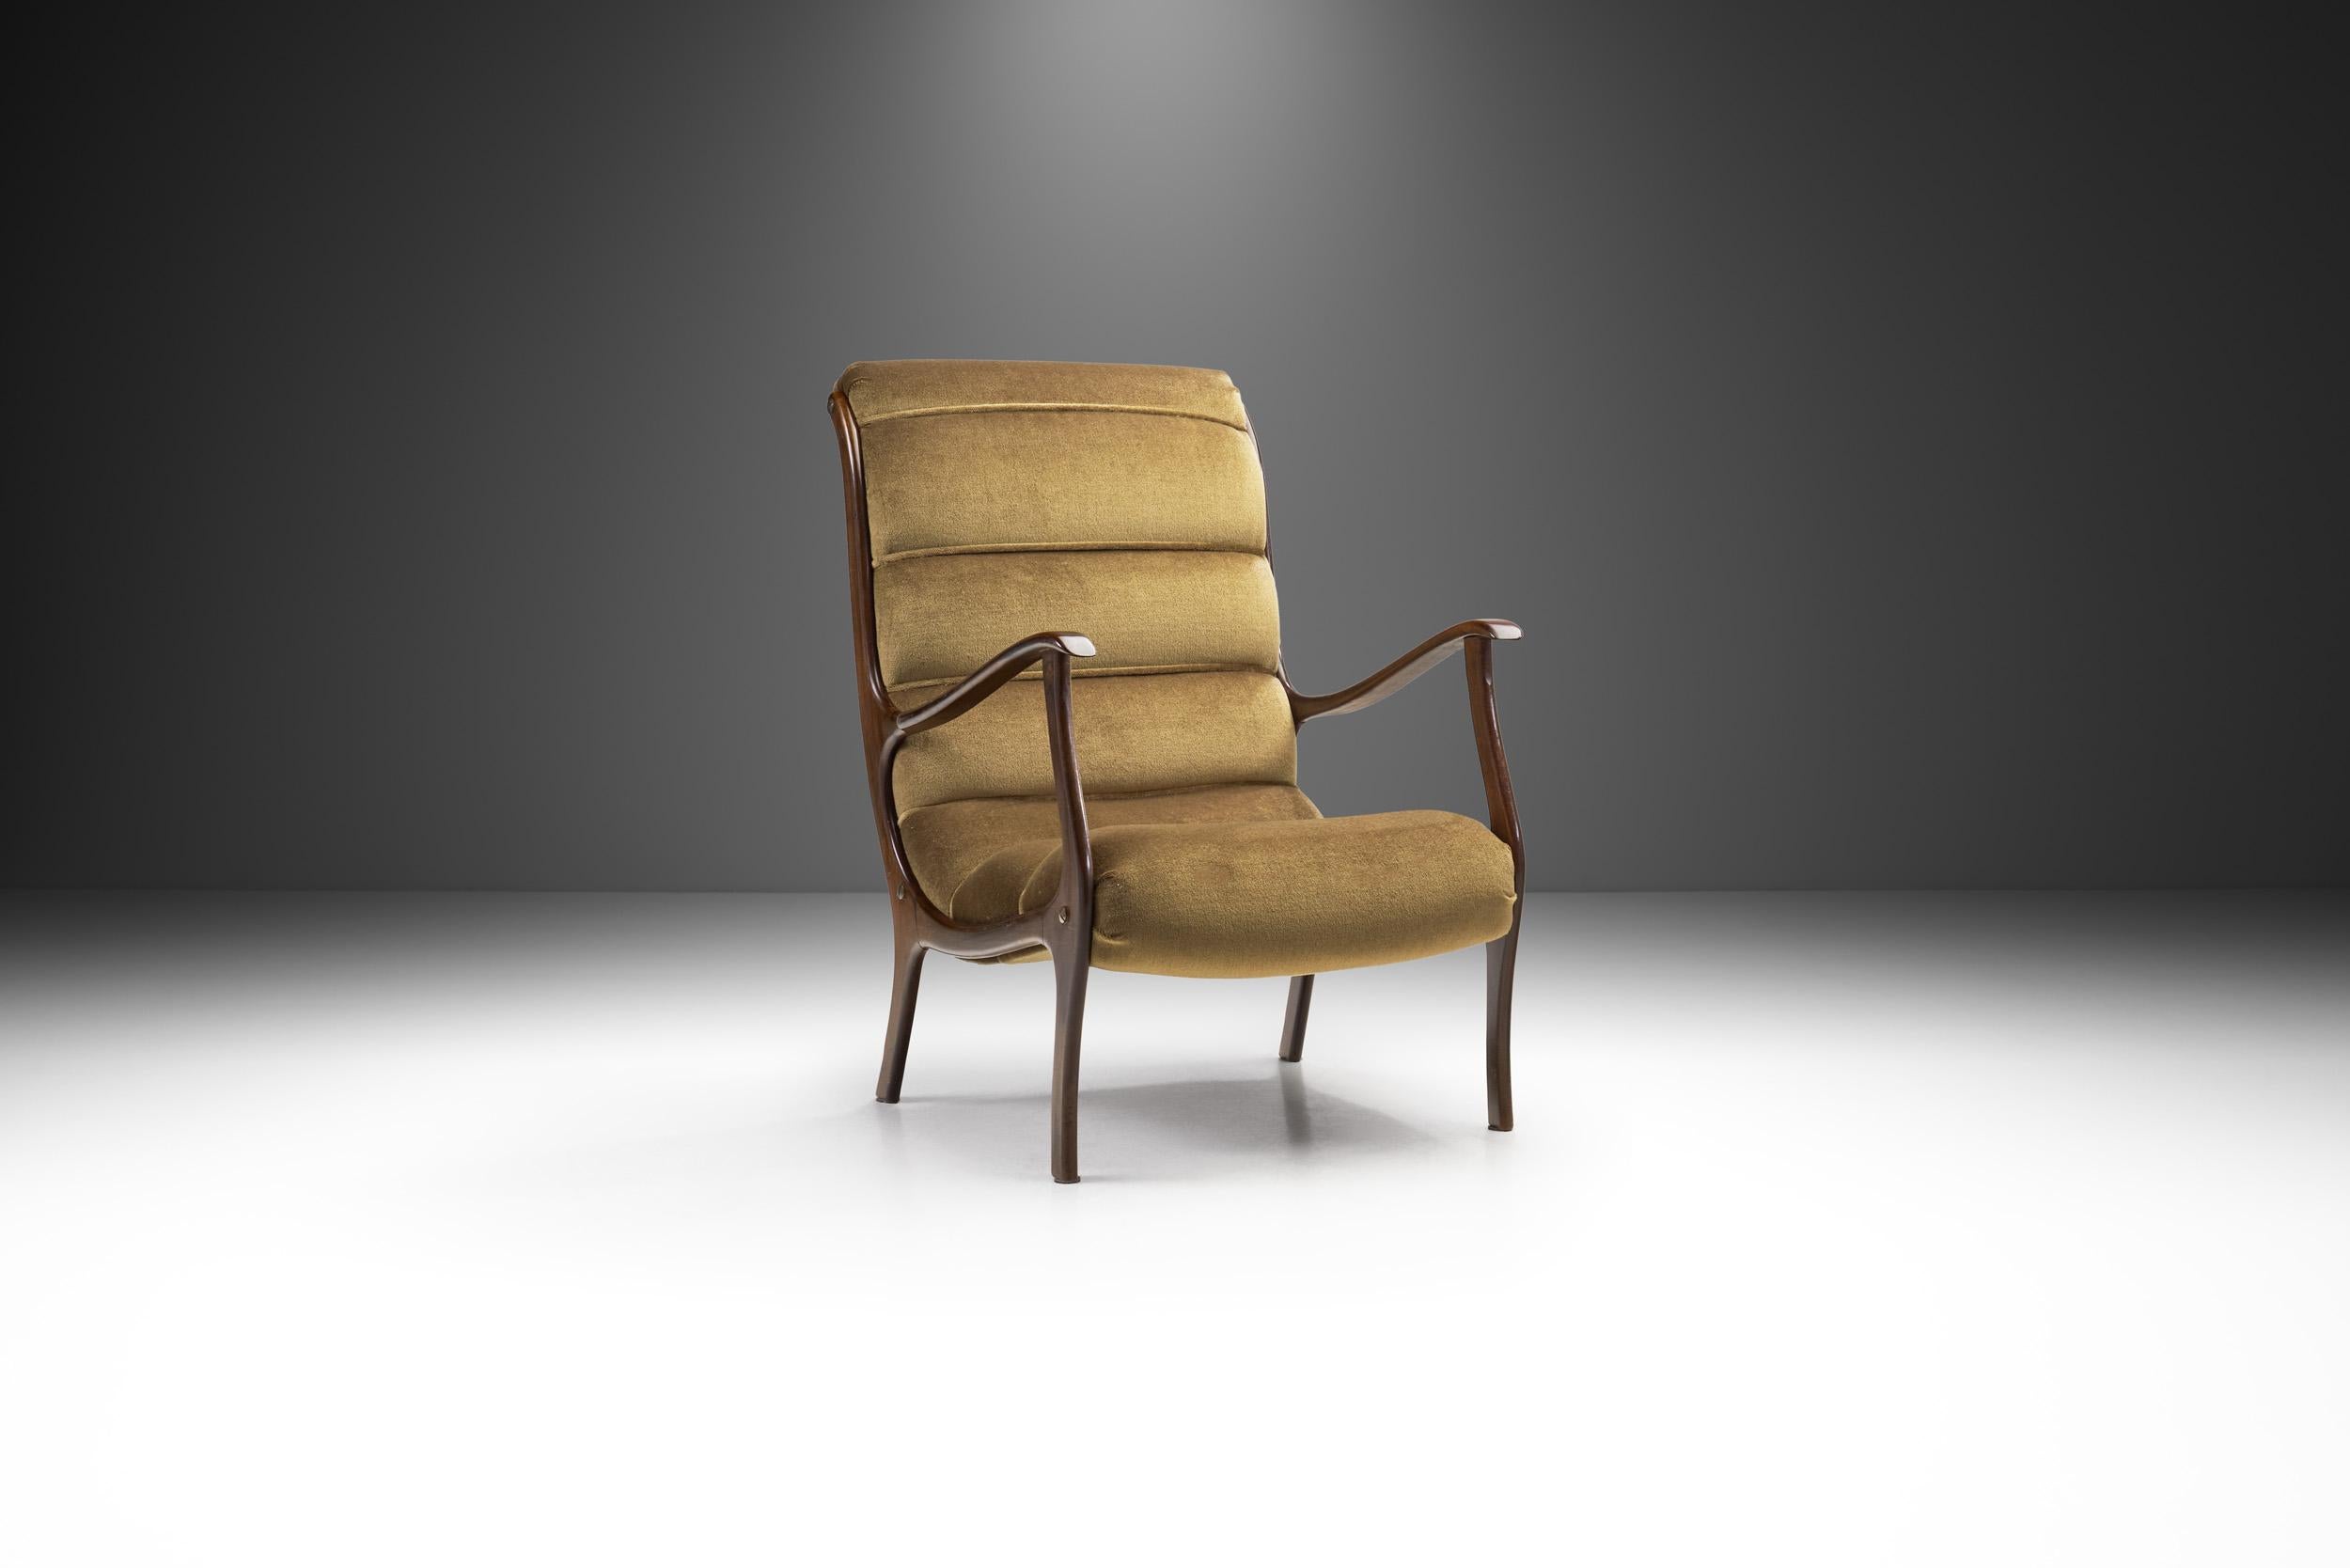 Like the 1958 Mitzi armchair, this model belongs to the most well-known chair designs of Italian designer, Ezio Longhi. This lounge chair takes one back to post-war Italy, when the now world-famous free form designs of the 1950s and 60s started